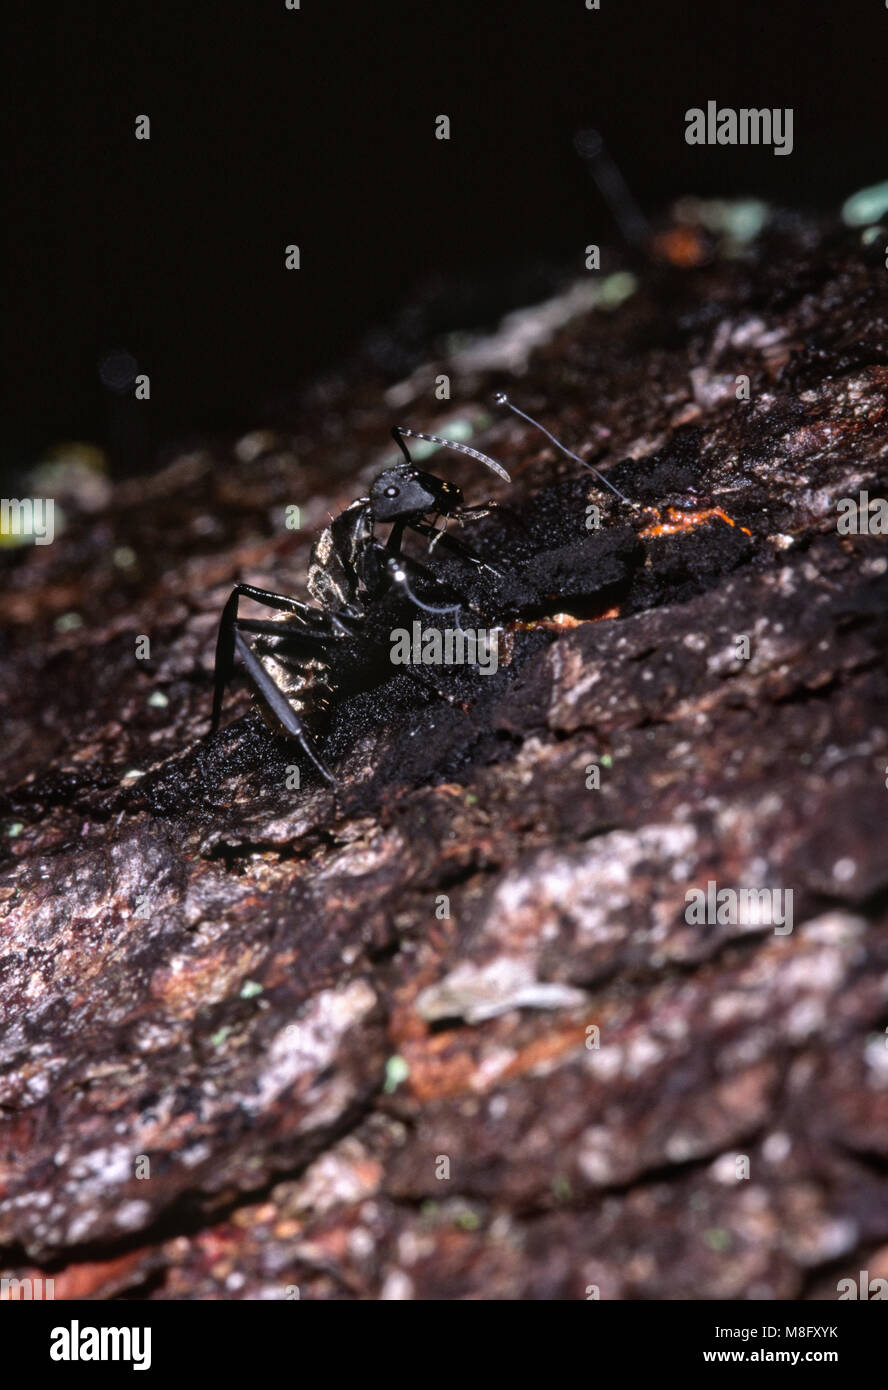 Golden carpenter ant (Camponotus sericeiventris) feeding on honeydew from scale insects (Stigmacoccus sp.) Stock Photo